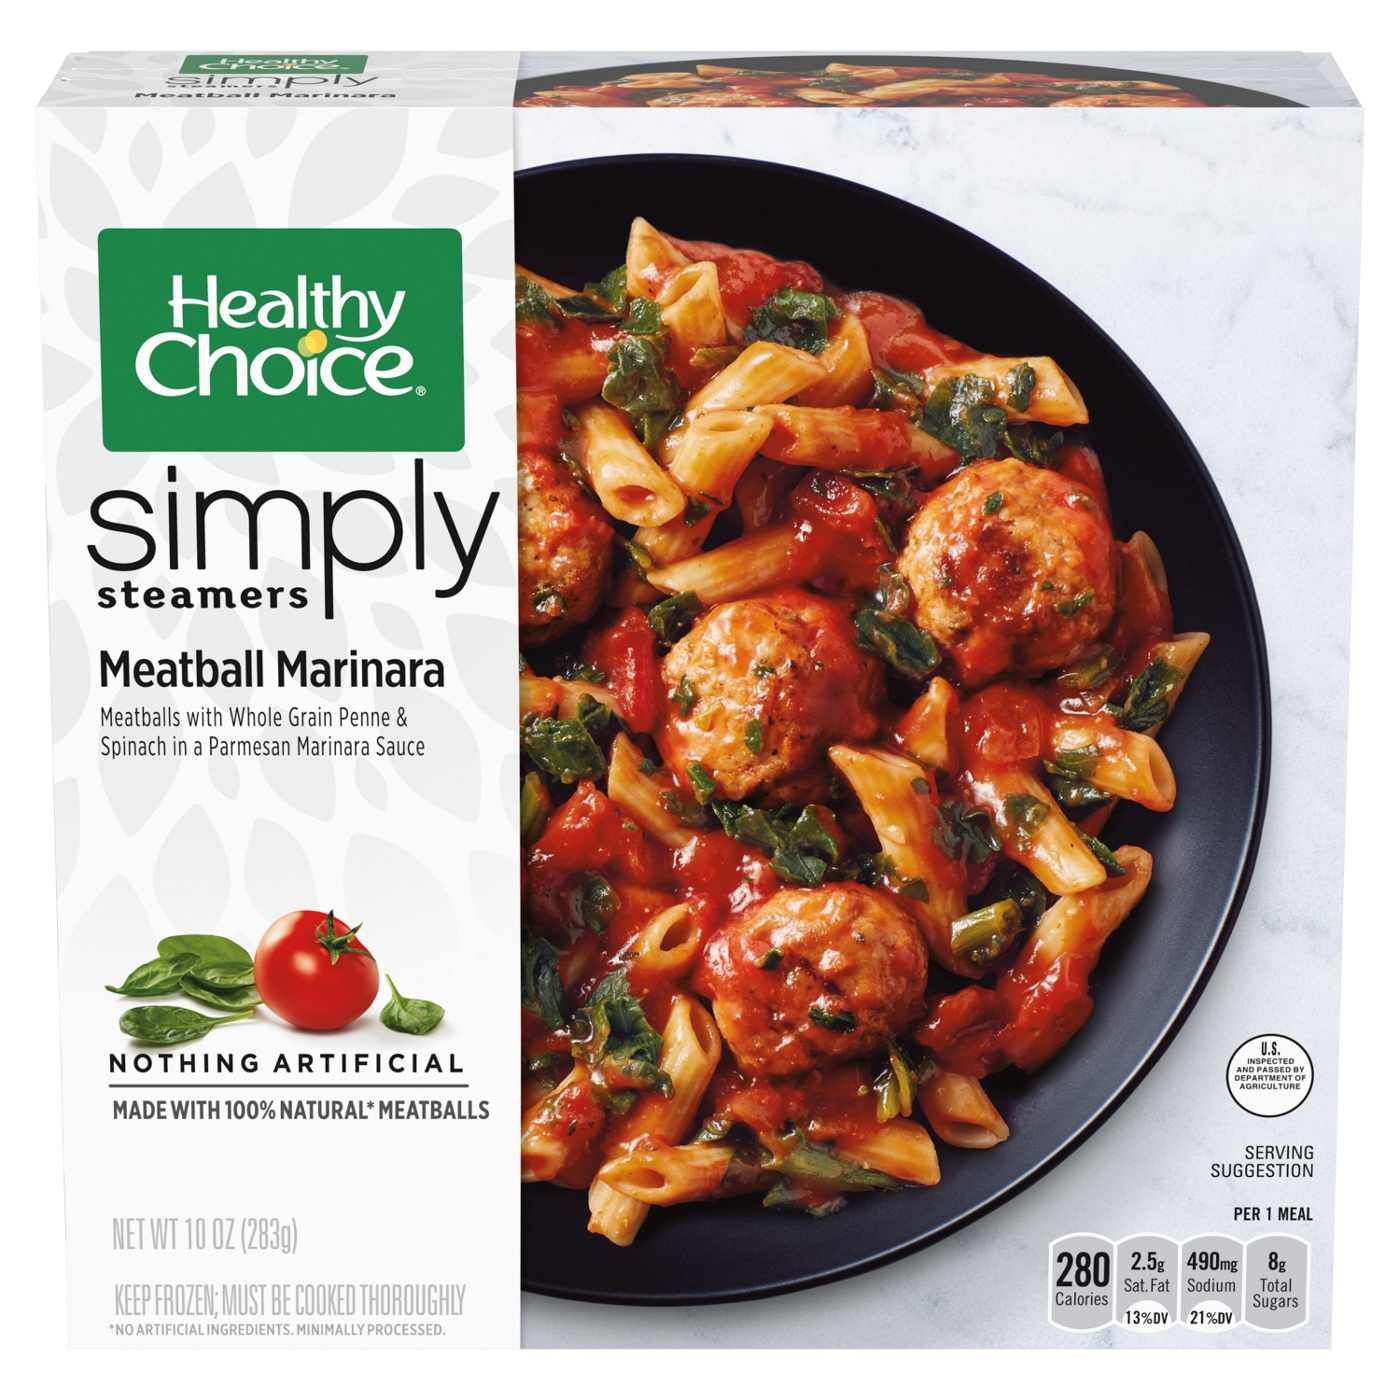 Healthy Choice Simply Steamers Meatball Marinara Frozen Meal; image 1 of 7